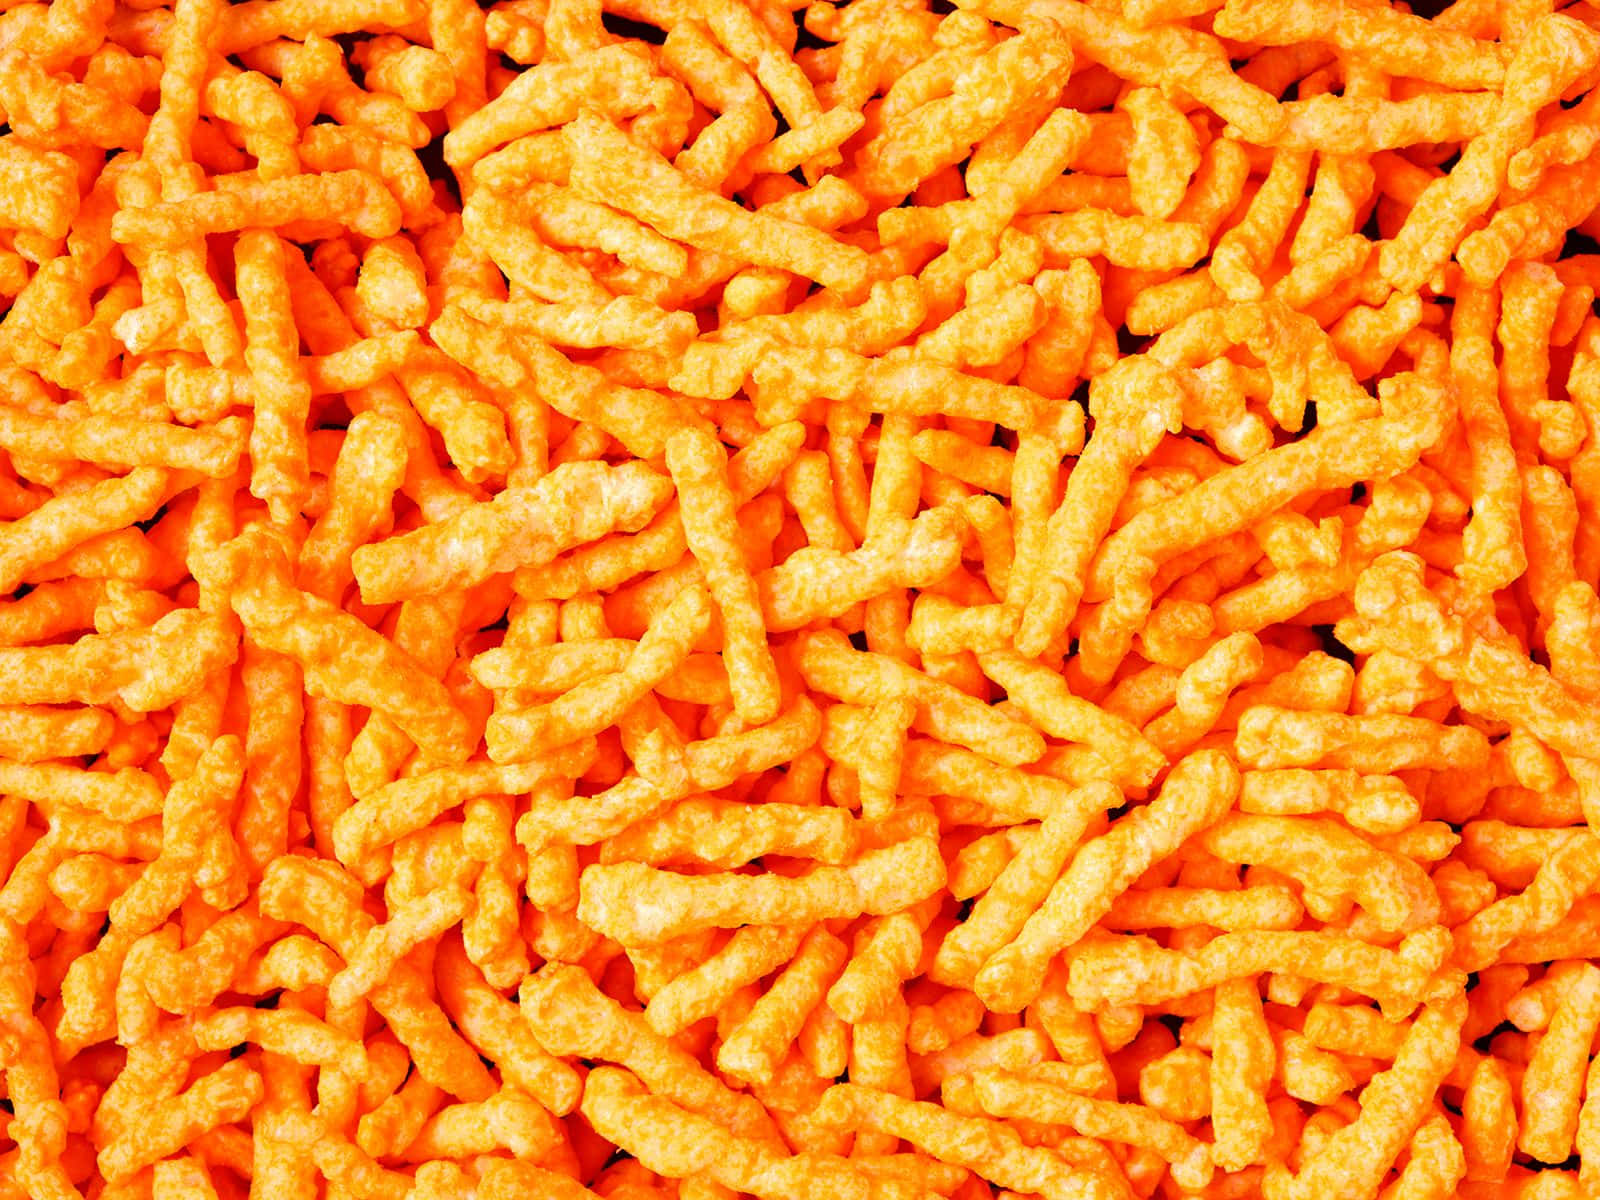 Enjoy Cheetos for a spicy snack in a variety of flavors! Wallpaper